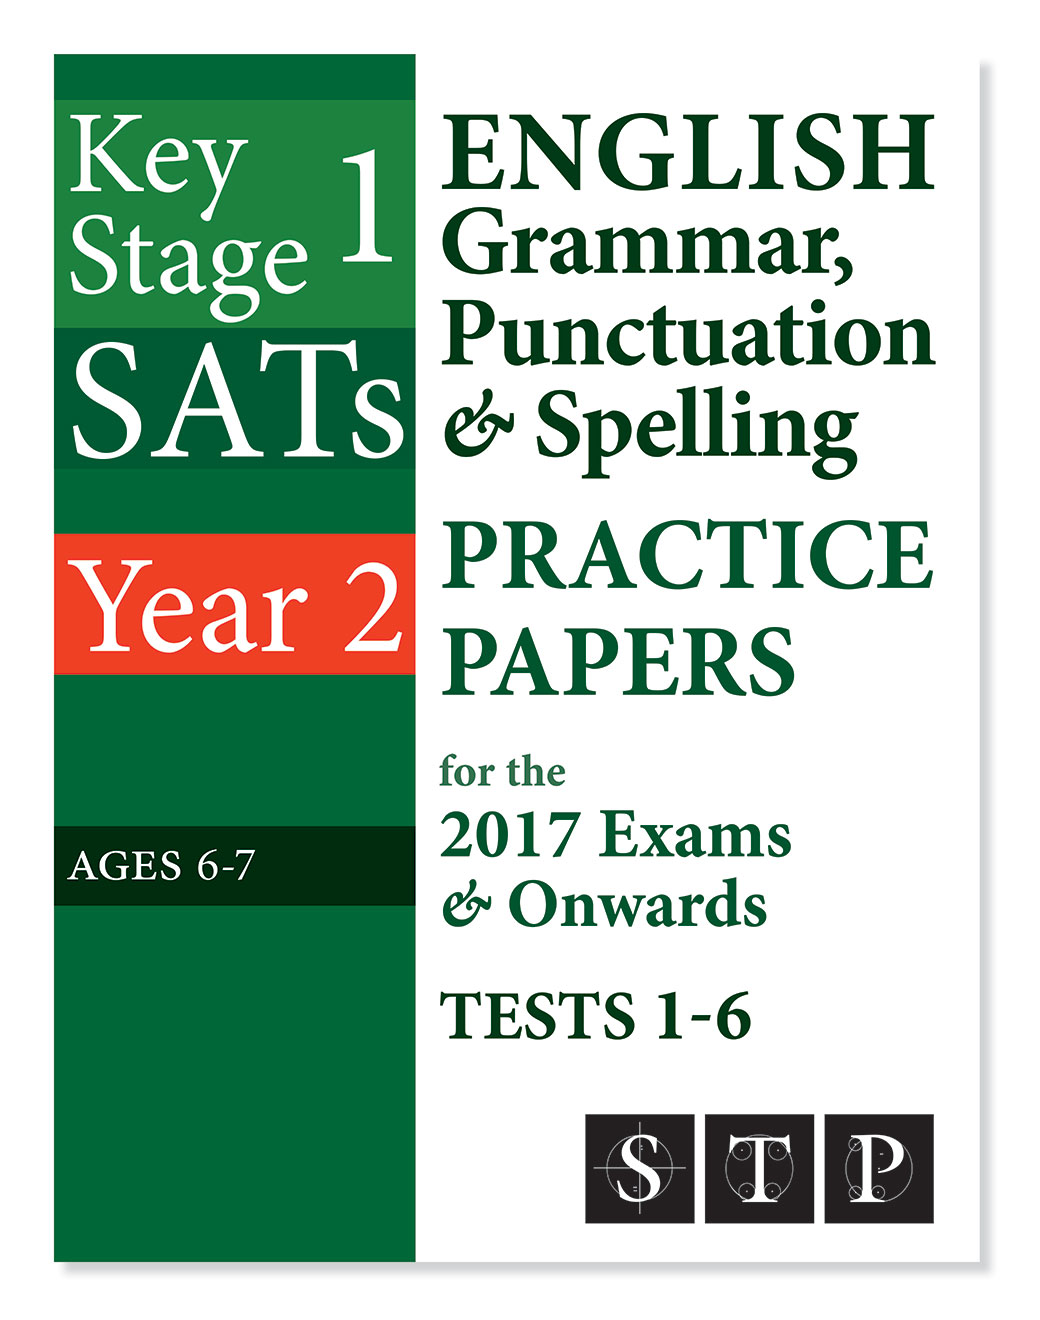 KS1 SATs English Grammar, Punctuation & Spelling Practice Papers for the 2017 Exams & Onwards Tests 1-10